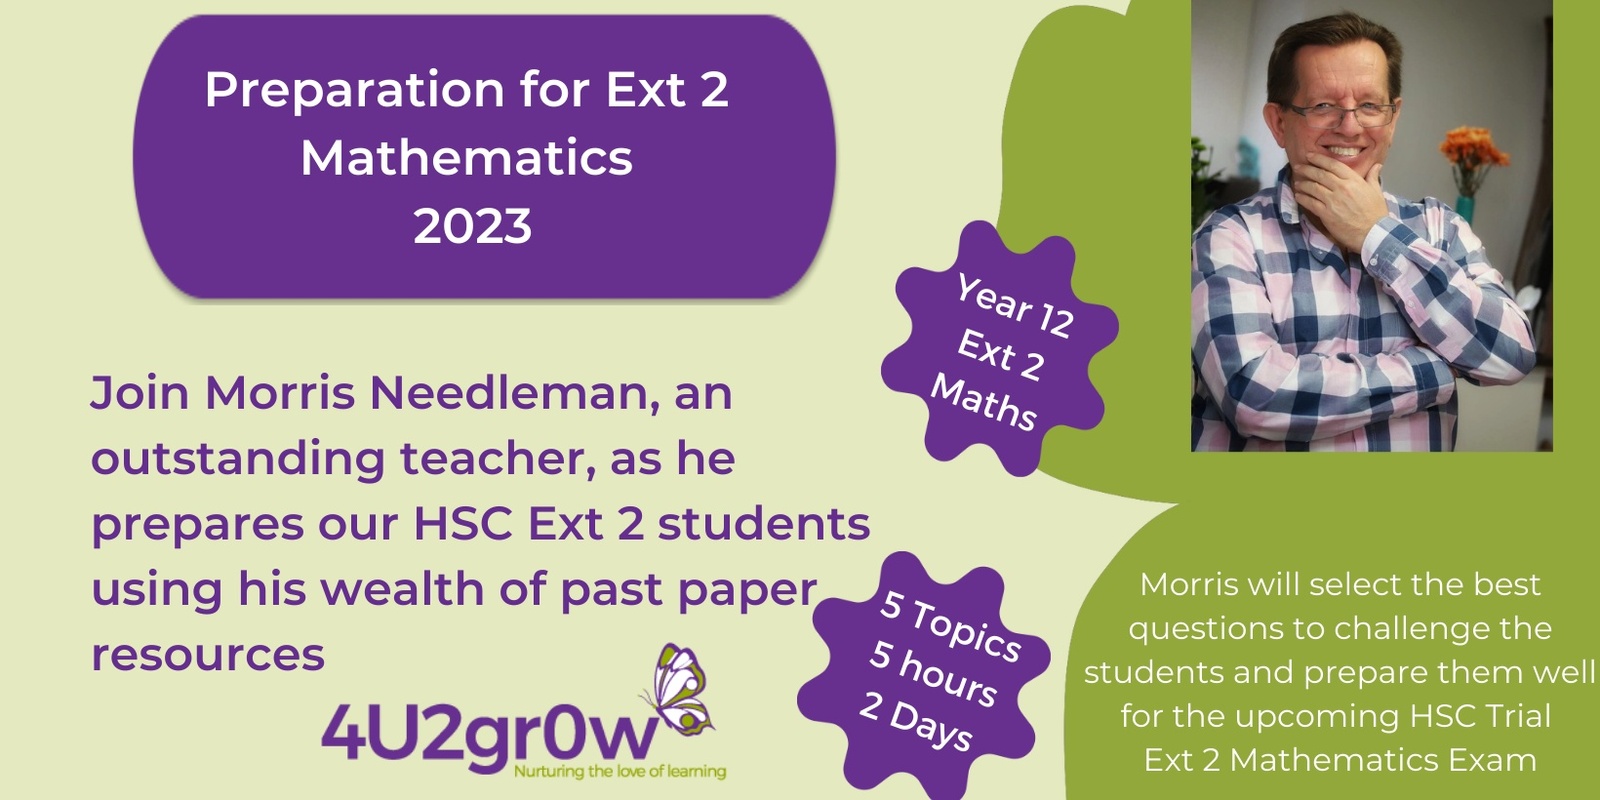 Year 12 Ext 2 Mathematics - Aiming for an E4